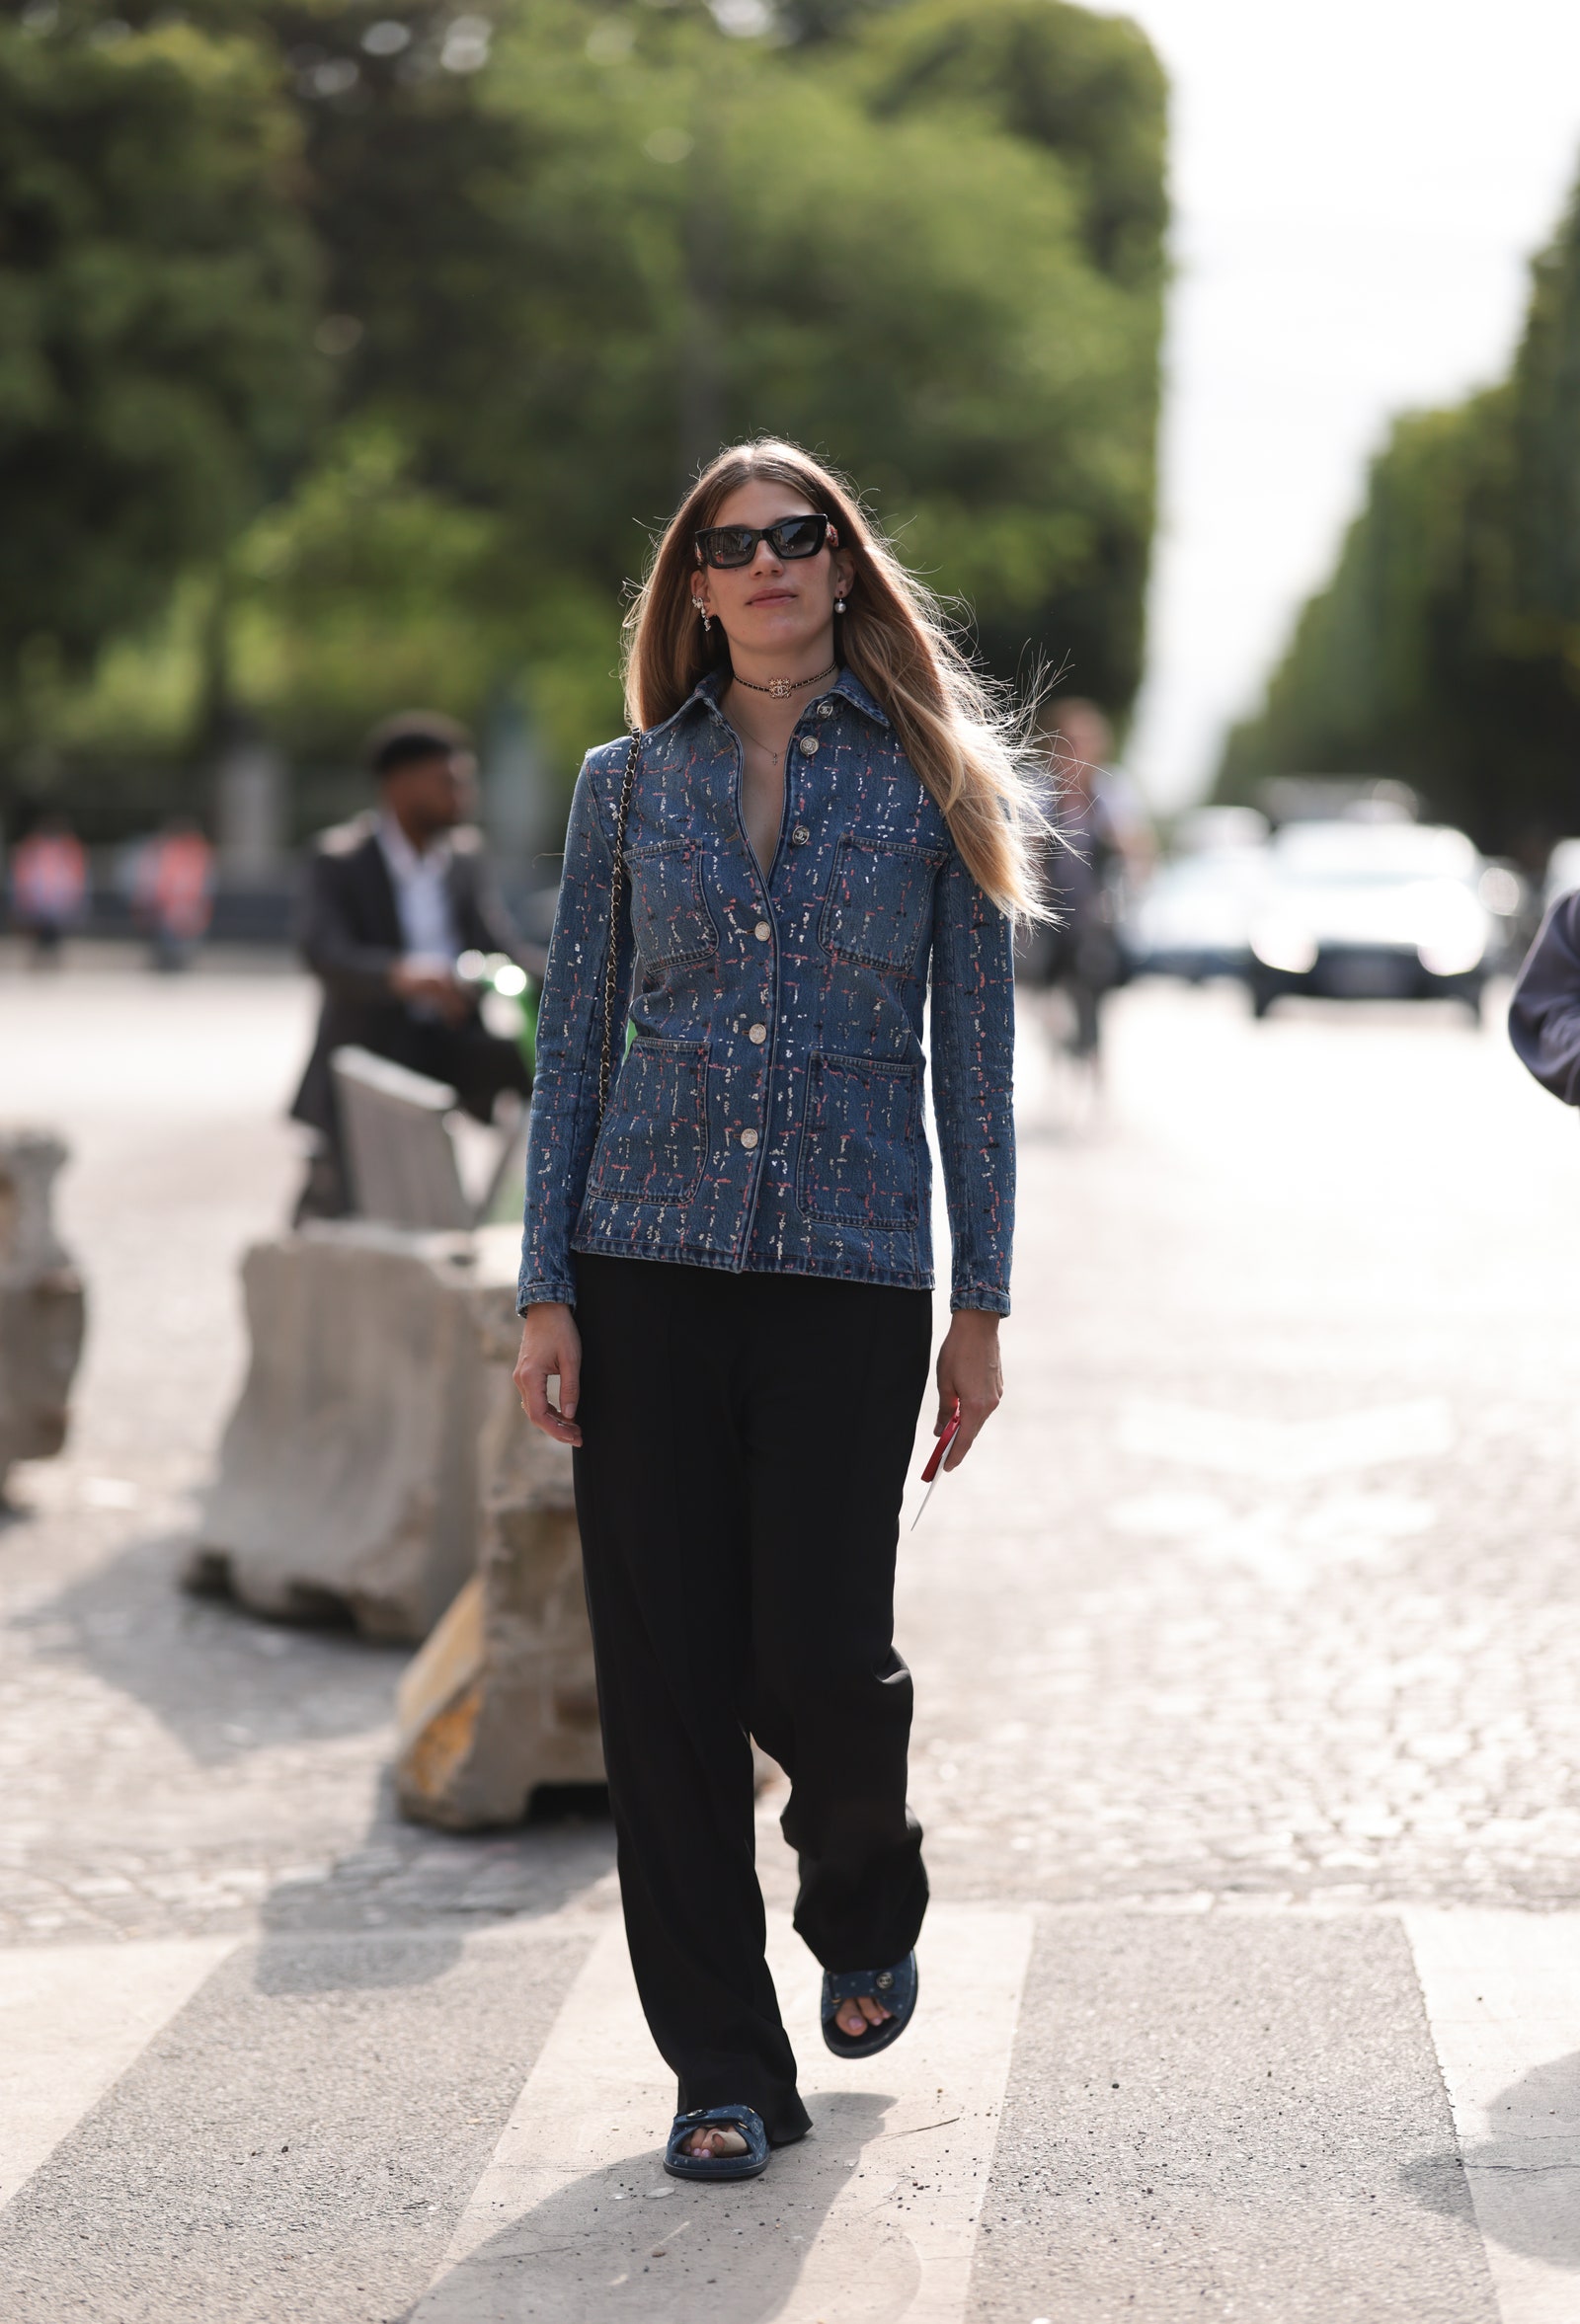 How To Dress Up Denim According To 5 StreetStyle Stars